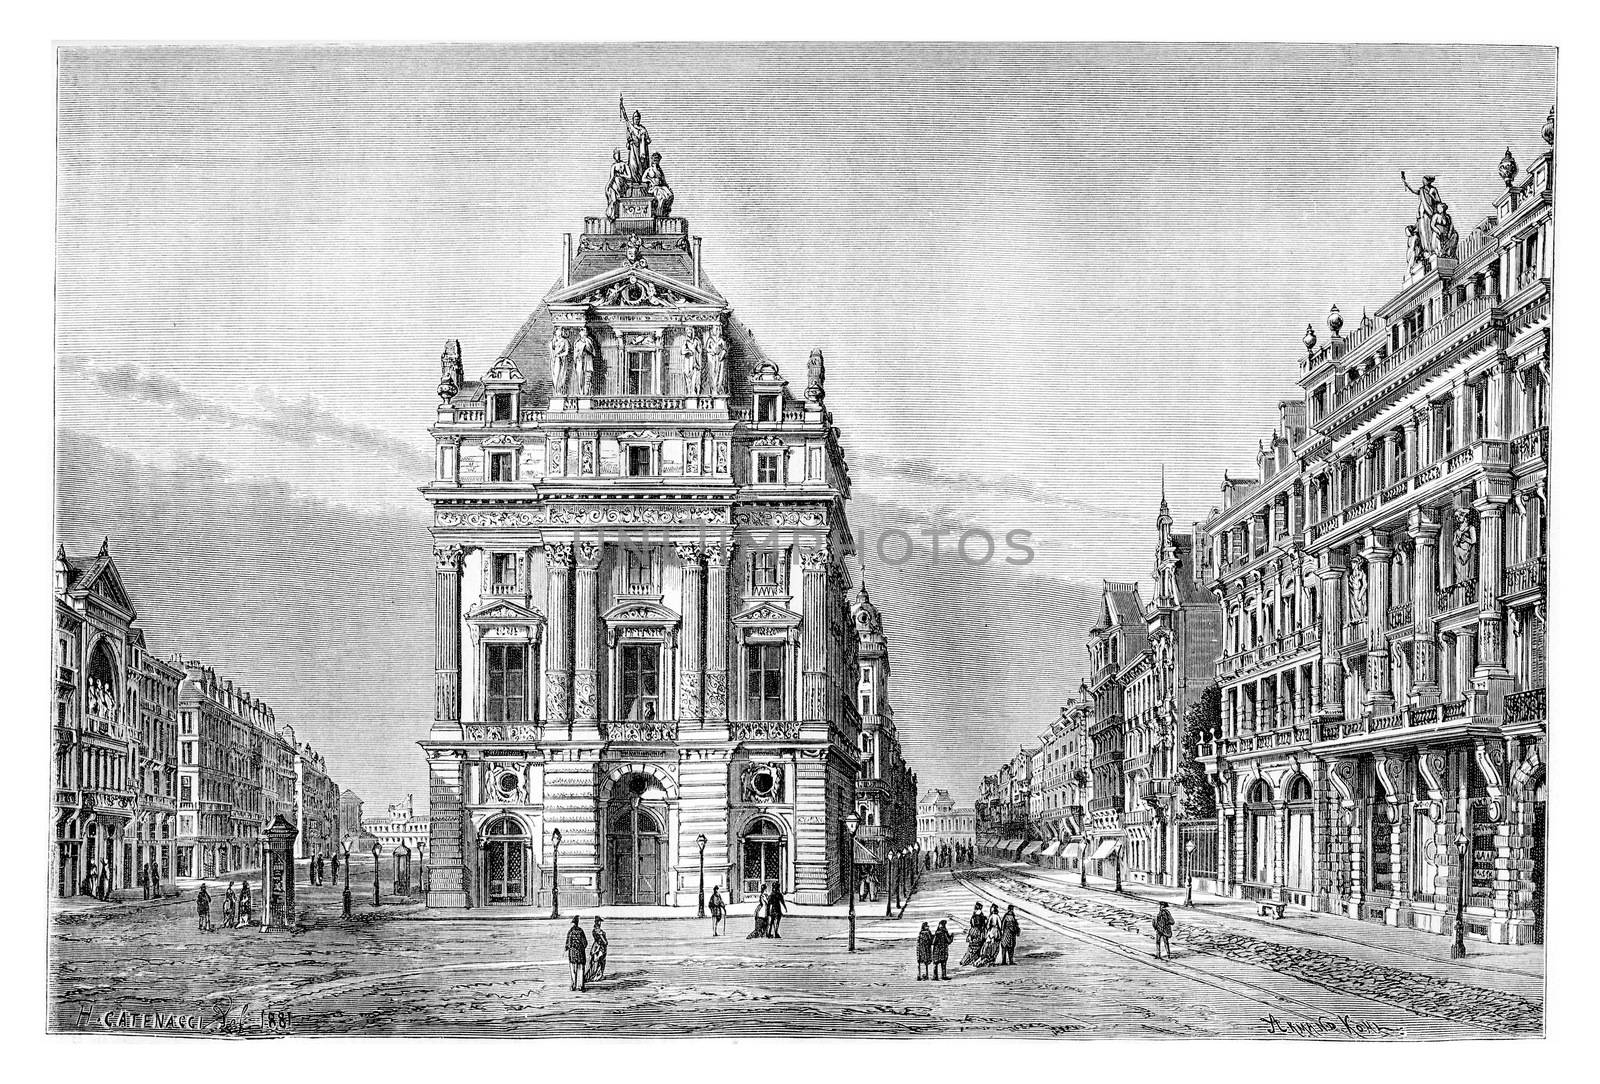 Northern and Anspach Boulevards and the Place de Brouckere in Brussels, Belgium, drawing by Catenacci based on a photograph by Levy, vintage illustration. Le Tour du Monde, Travel Journal, 1881